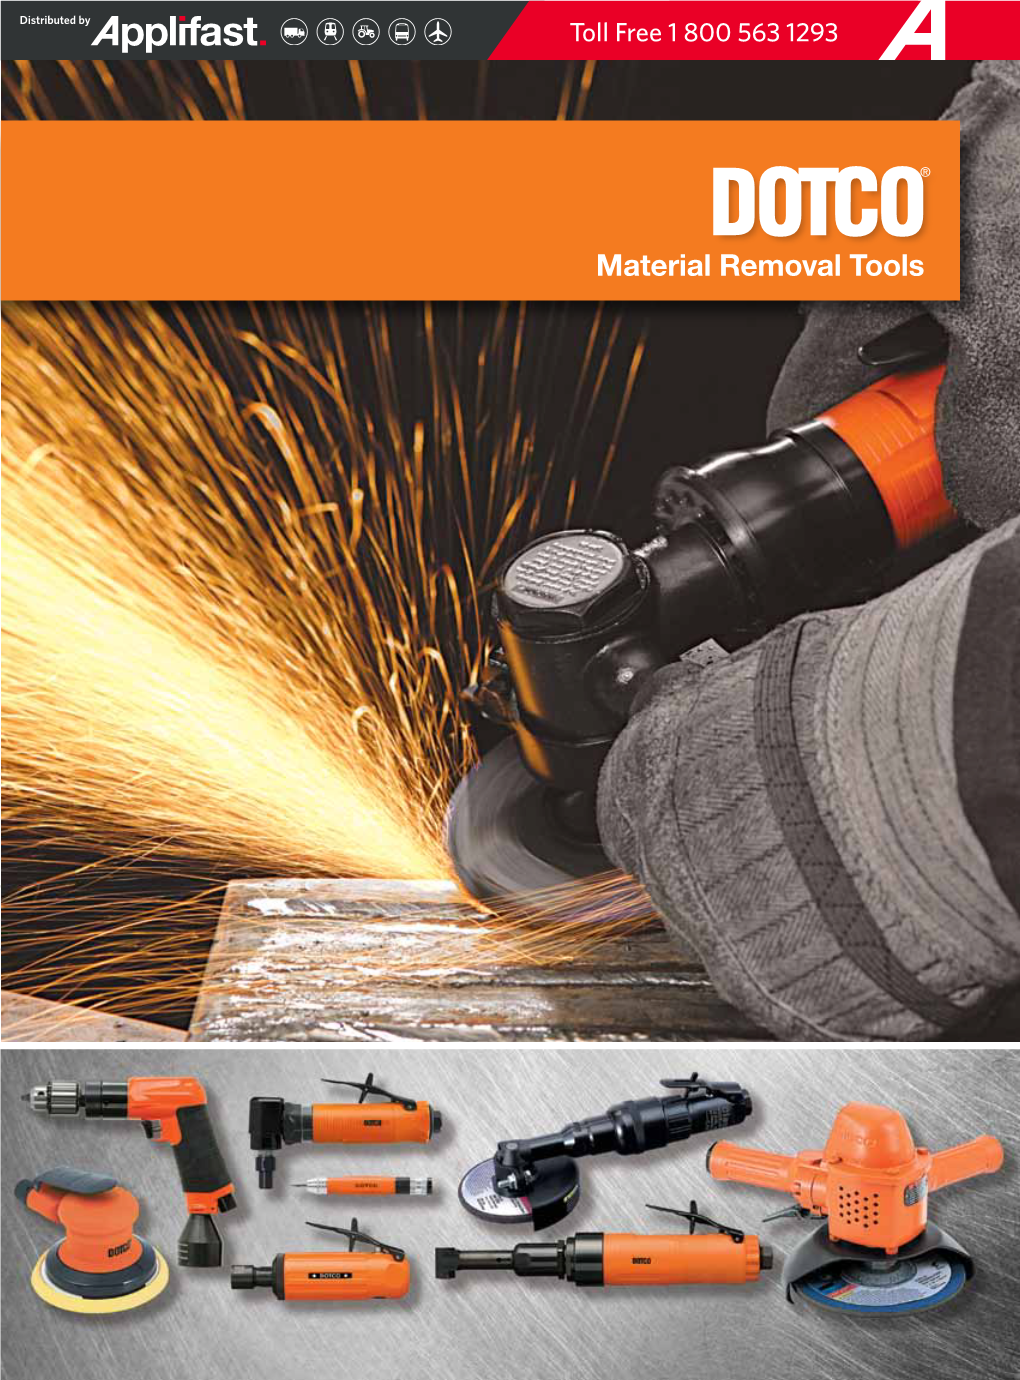 Apex Cleco & Dotco Material Removal Tools